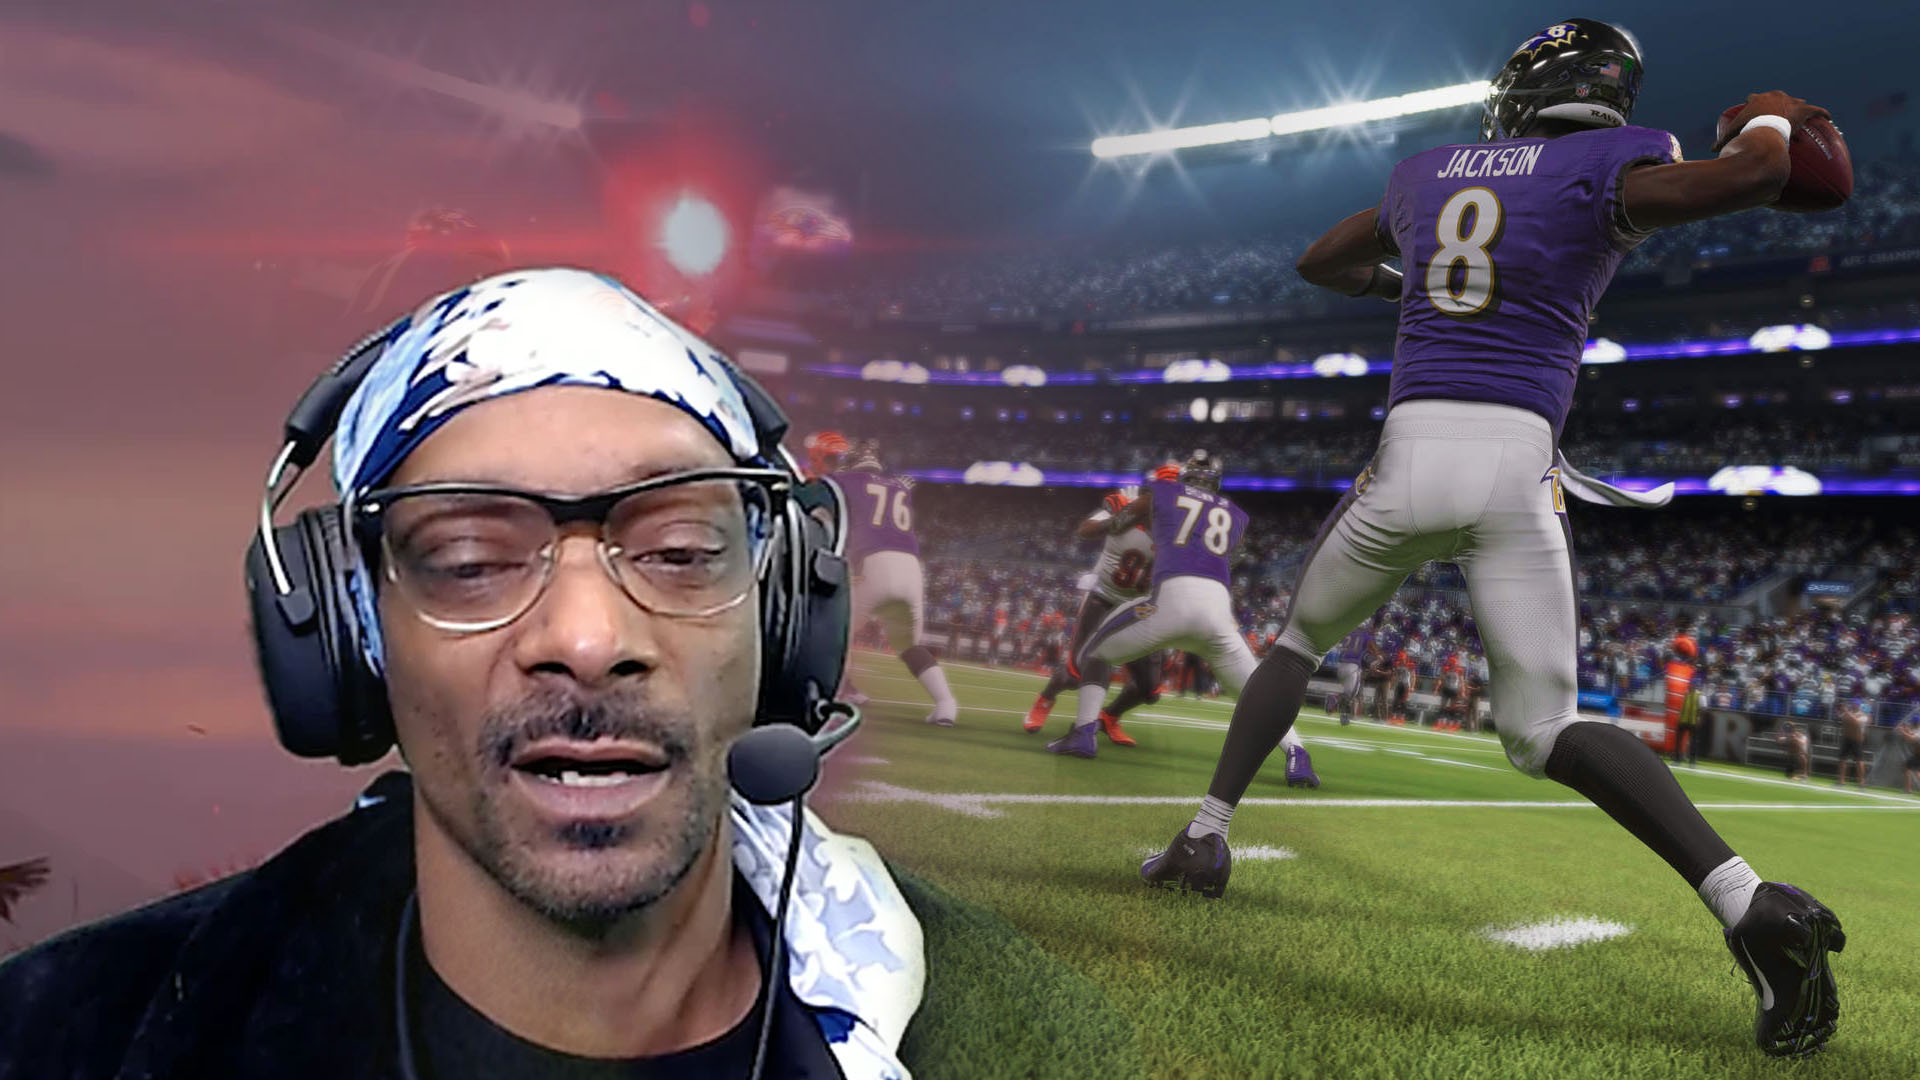 Snoop Dogg rage-quits game, leaves Twitch on, Ents & Arts News